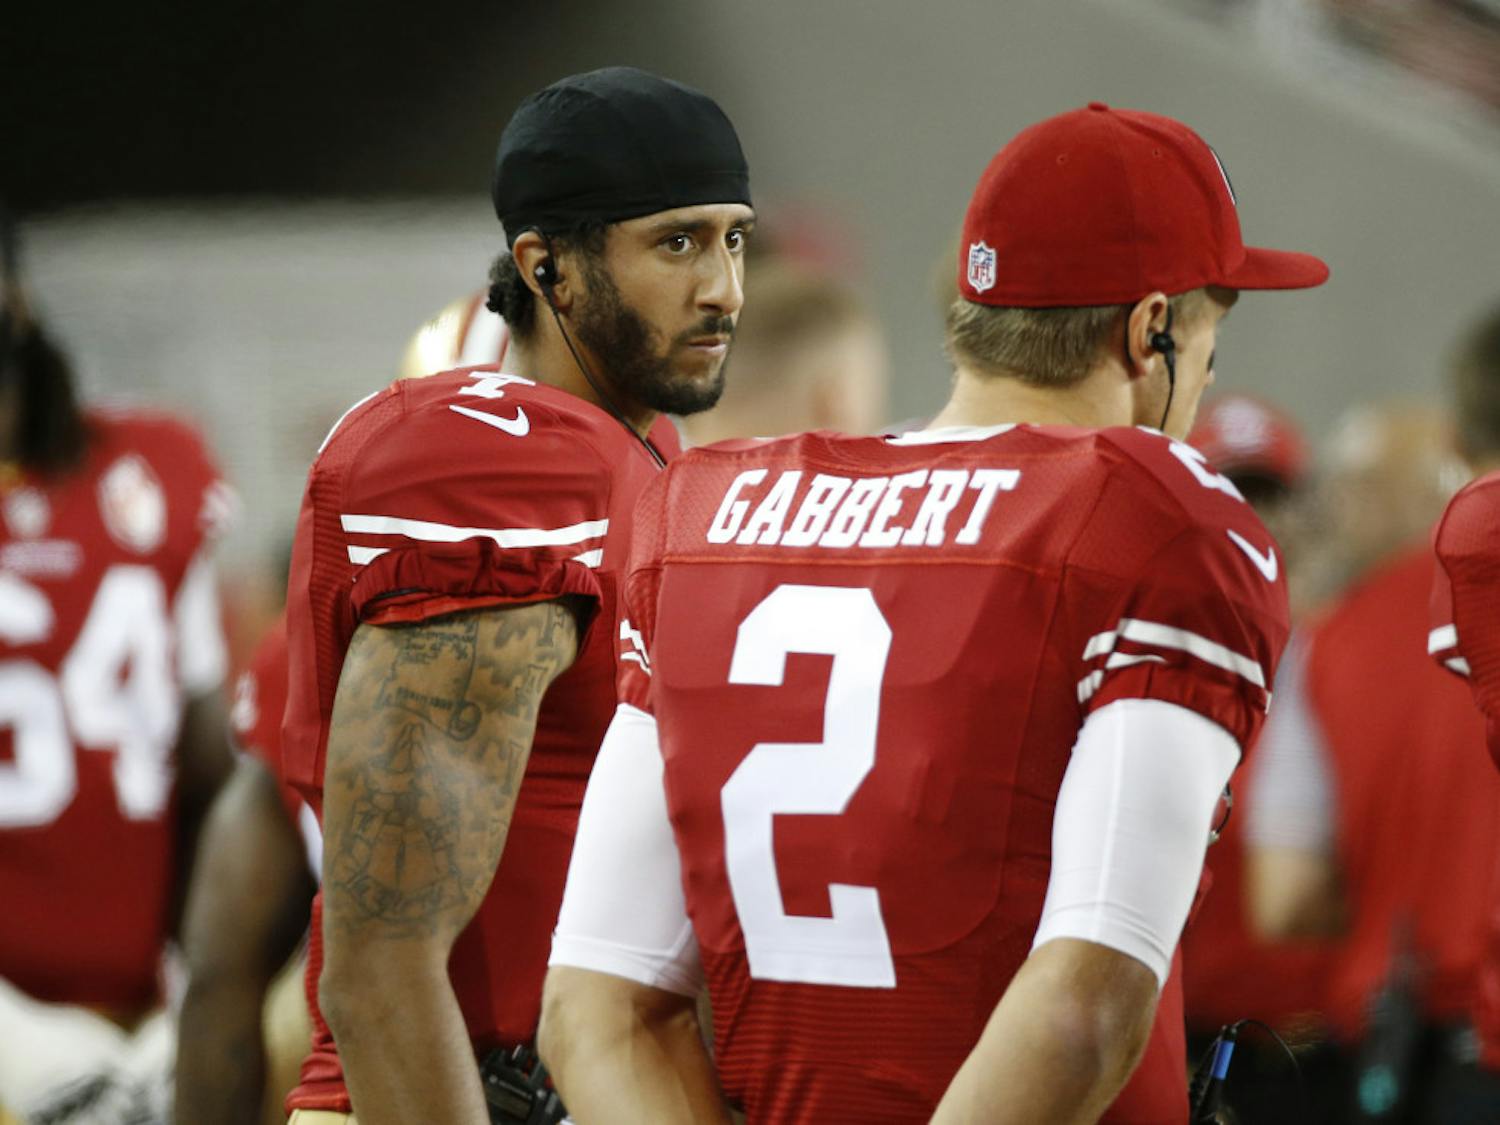 San Francisco 49ers quarterbacks Colin Kaepernick, left, and Blaine Gabbert stand on the sideline during the second half of an NFL preseason football game against the Green Bay Packers on Friday, Aug. 26, 2016, in Santa Clara, Calif. Green Bay won 21-10. (AP Photo/Tony Avelar)